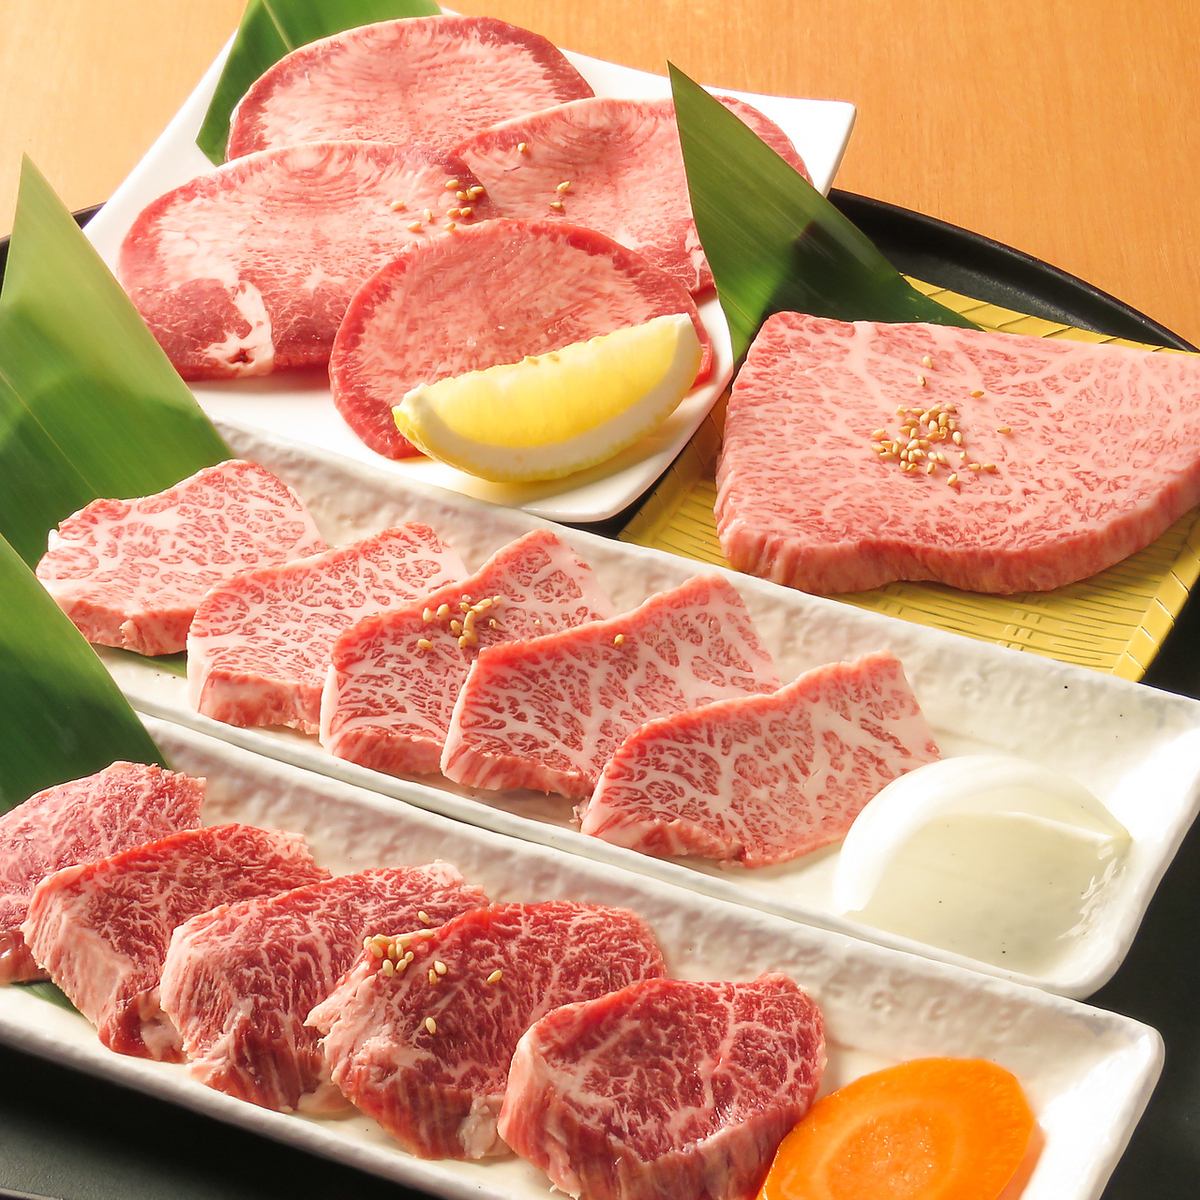 You'll be amazed by the deliciousness! "Premium Kalbi" that melts in your mouth